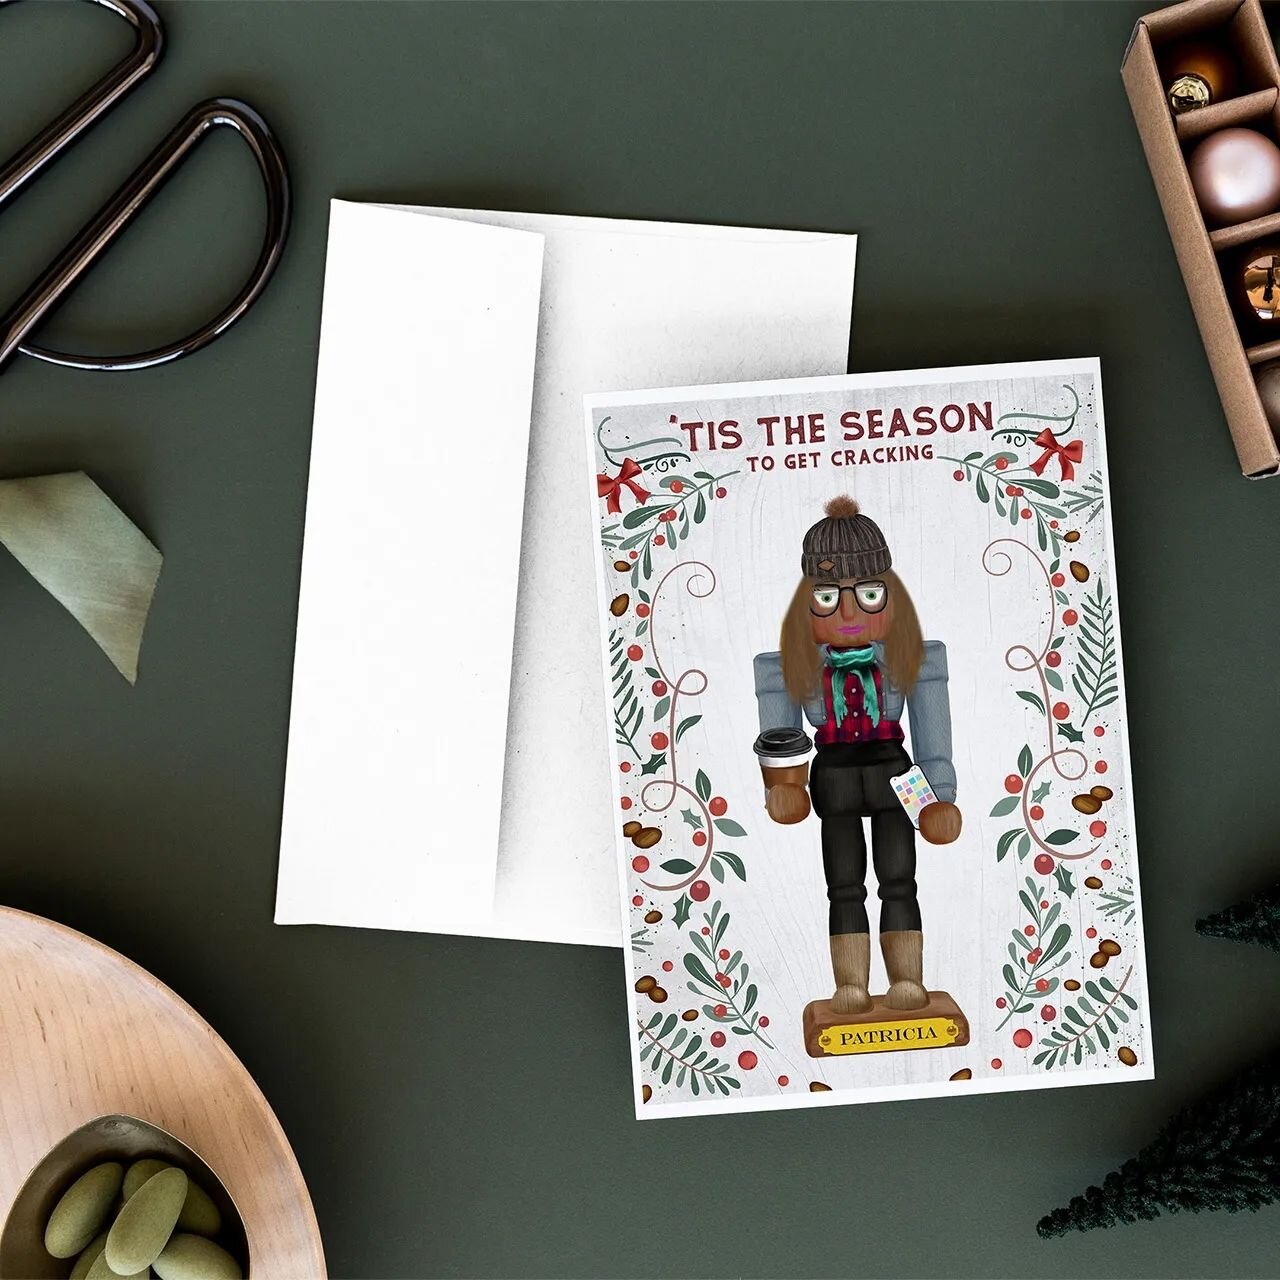 Have you ever thought, I NEED to make a nutcracker version of myself or my friend?? Well, look no further! I've just launched my custom nutcracker prints and cards for the nutcracker enthusiast in your life! Inspired by my recent nutcracker puzzle de